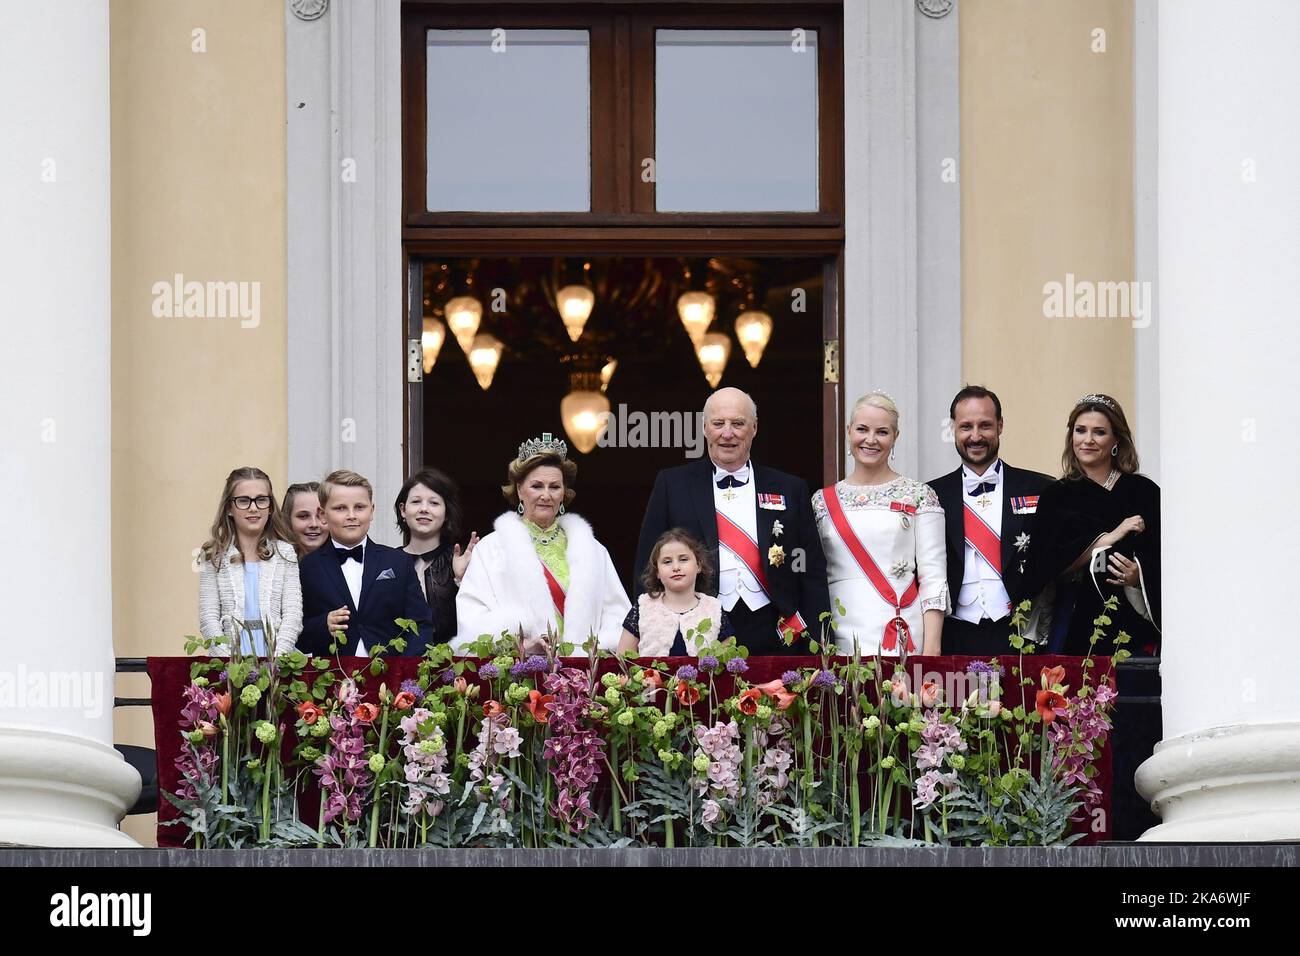 Oslo, Norway 20170509. From left: Leah Isadora Behn, Princess Ingrid Alexandra of Norway, Prince Sverre Magnus of Norway, Maud Angelica Behn , Queen Sonja of Norway, Emma Tallulah Behn, King Harald of Norway, Crown Princess Mette-Marit of Norway , Crown Prince Haakon of Norway, and Princess Märtha Louise of Norway greet the audience from the Palace Balkony on the occasion of The Royal Couples 80th anniversary celebration. Photo: Jon Olav Nesvold / NTB scanpix  Stock Photo